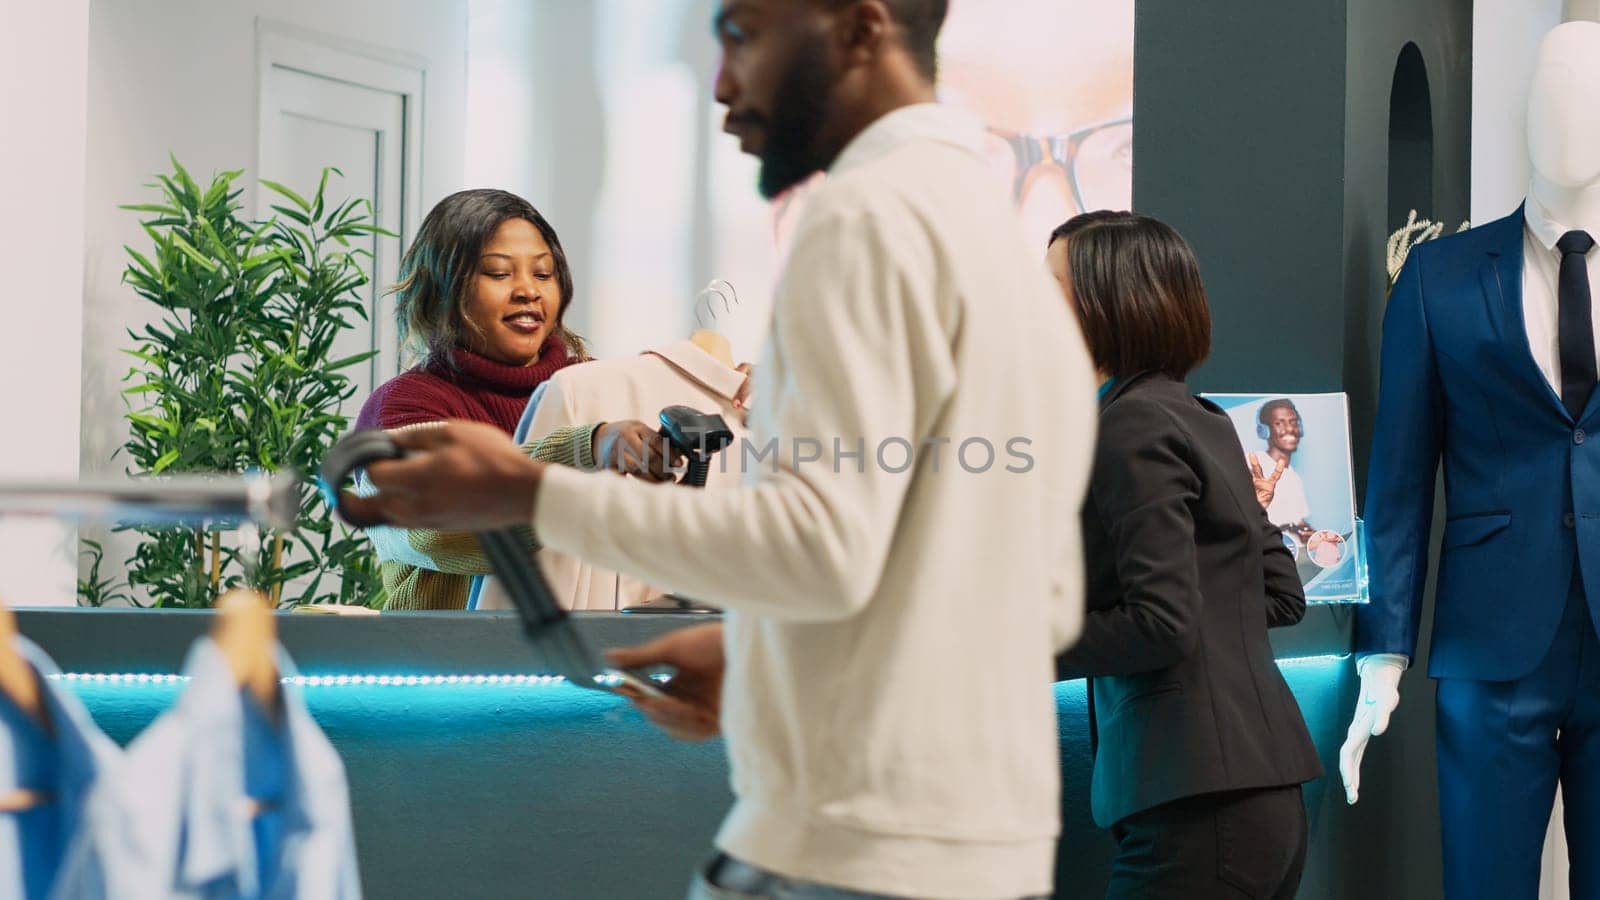 Asian client preparing to pay for clothes at cash register by DCStudio